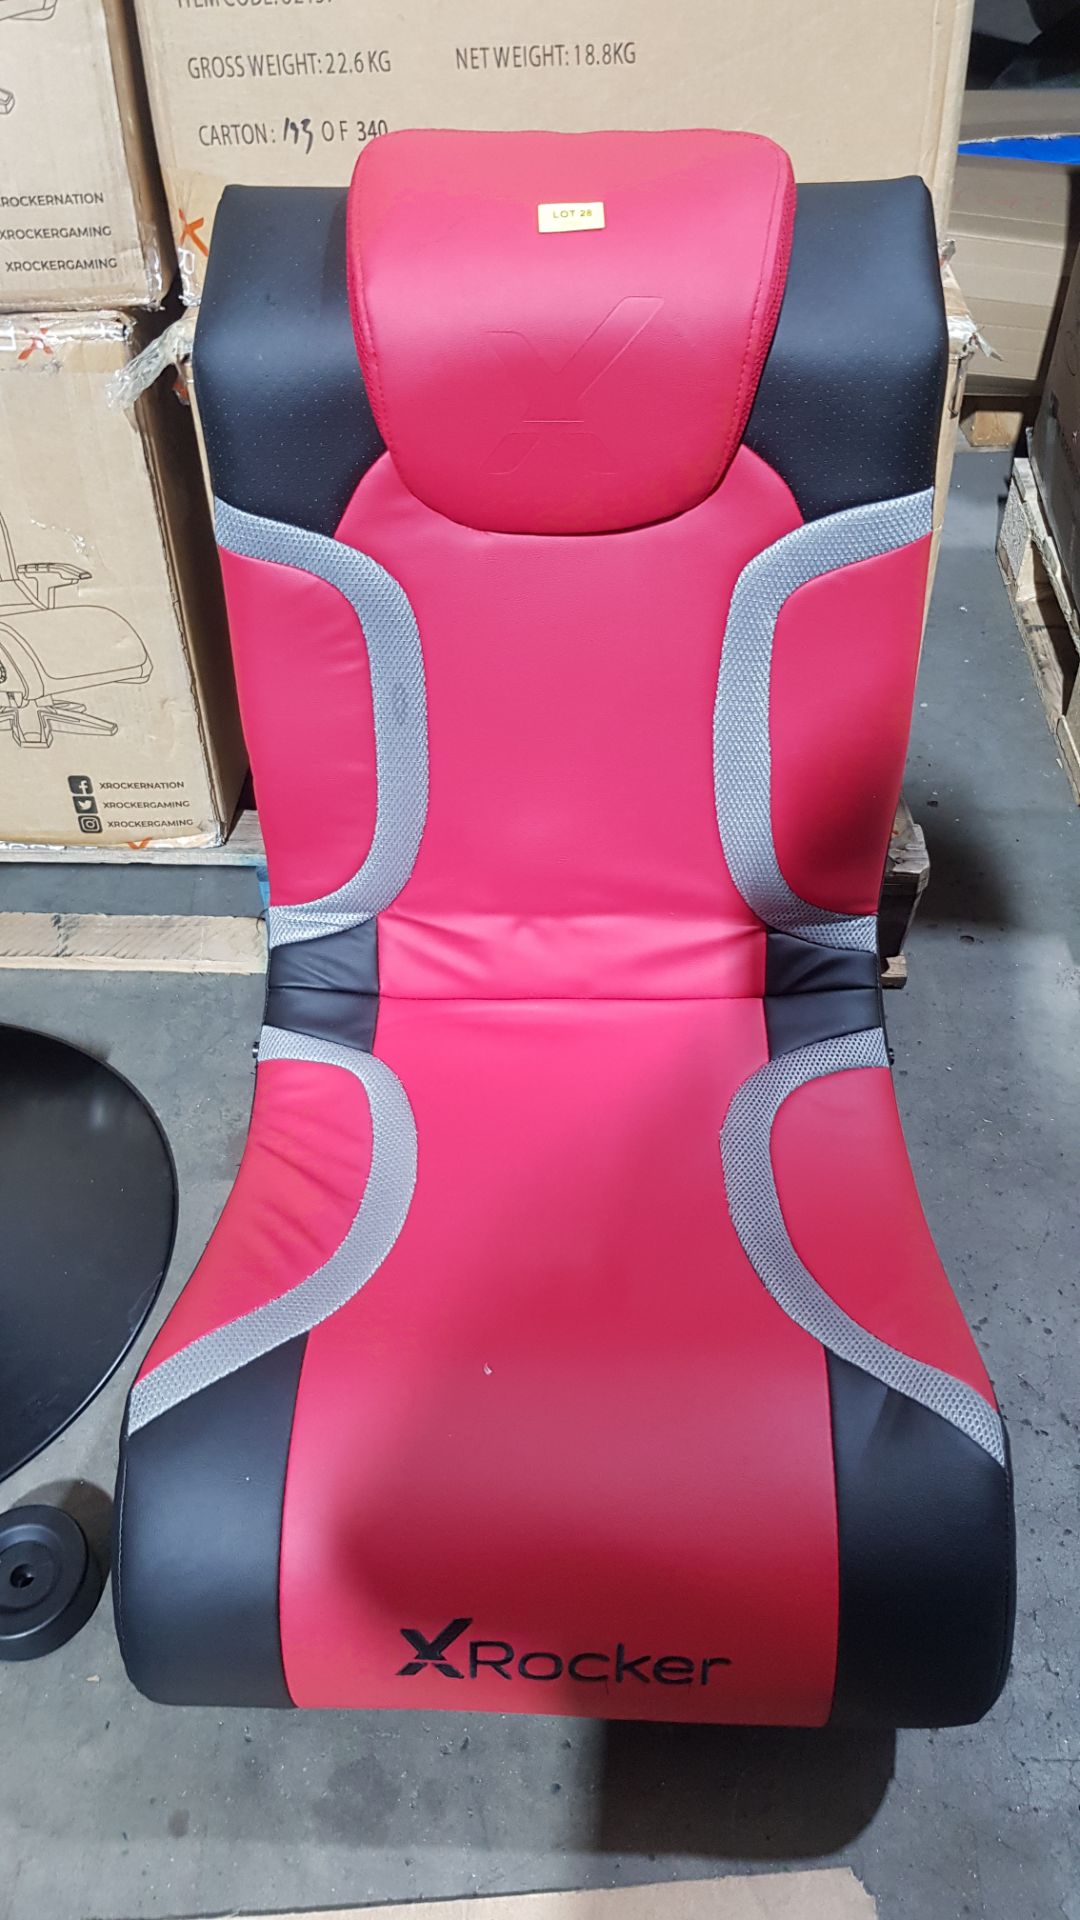 Title: (28/R3) RRP £169X Rocker Vision 2.1 Gaming Chair (Red/Black/Grey)2.1 Surround - Image 10 of 17